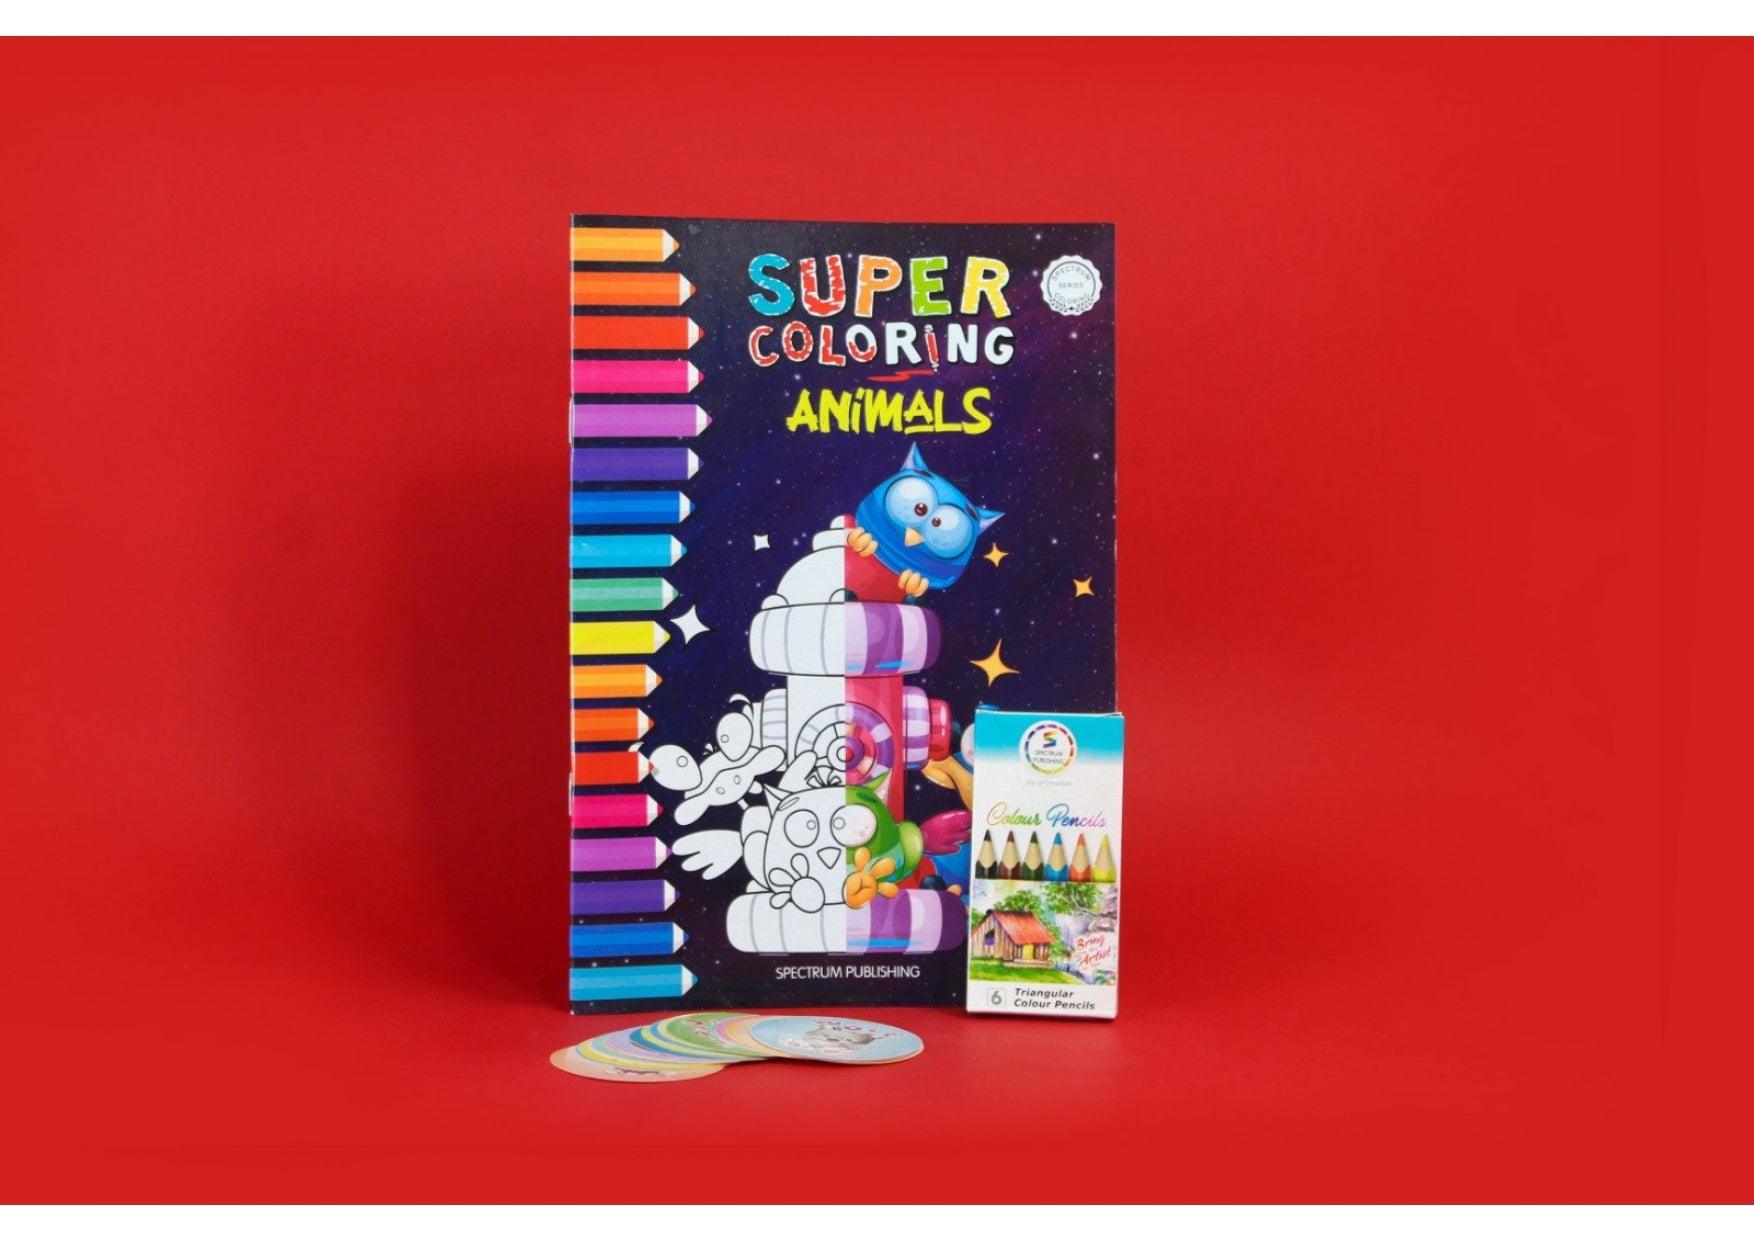 Super coloring animals book - Ourkids - Spectrum Publishing